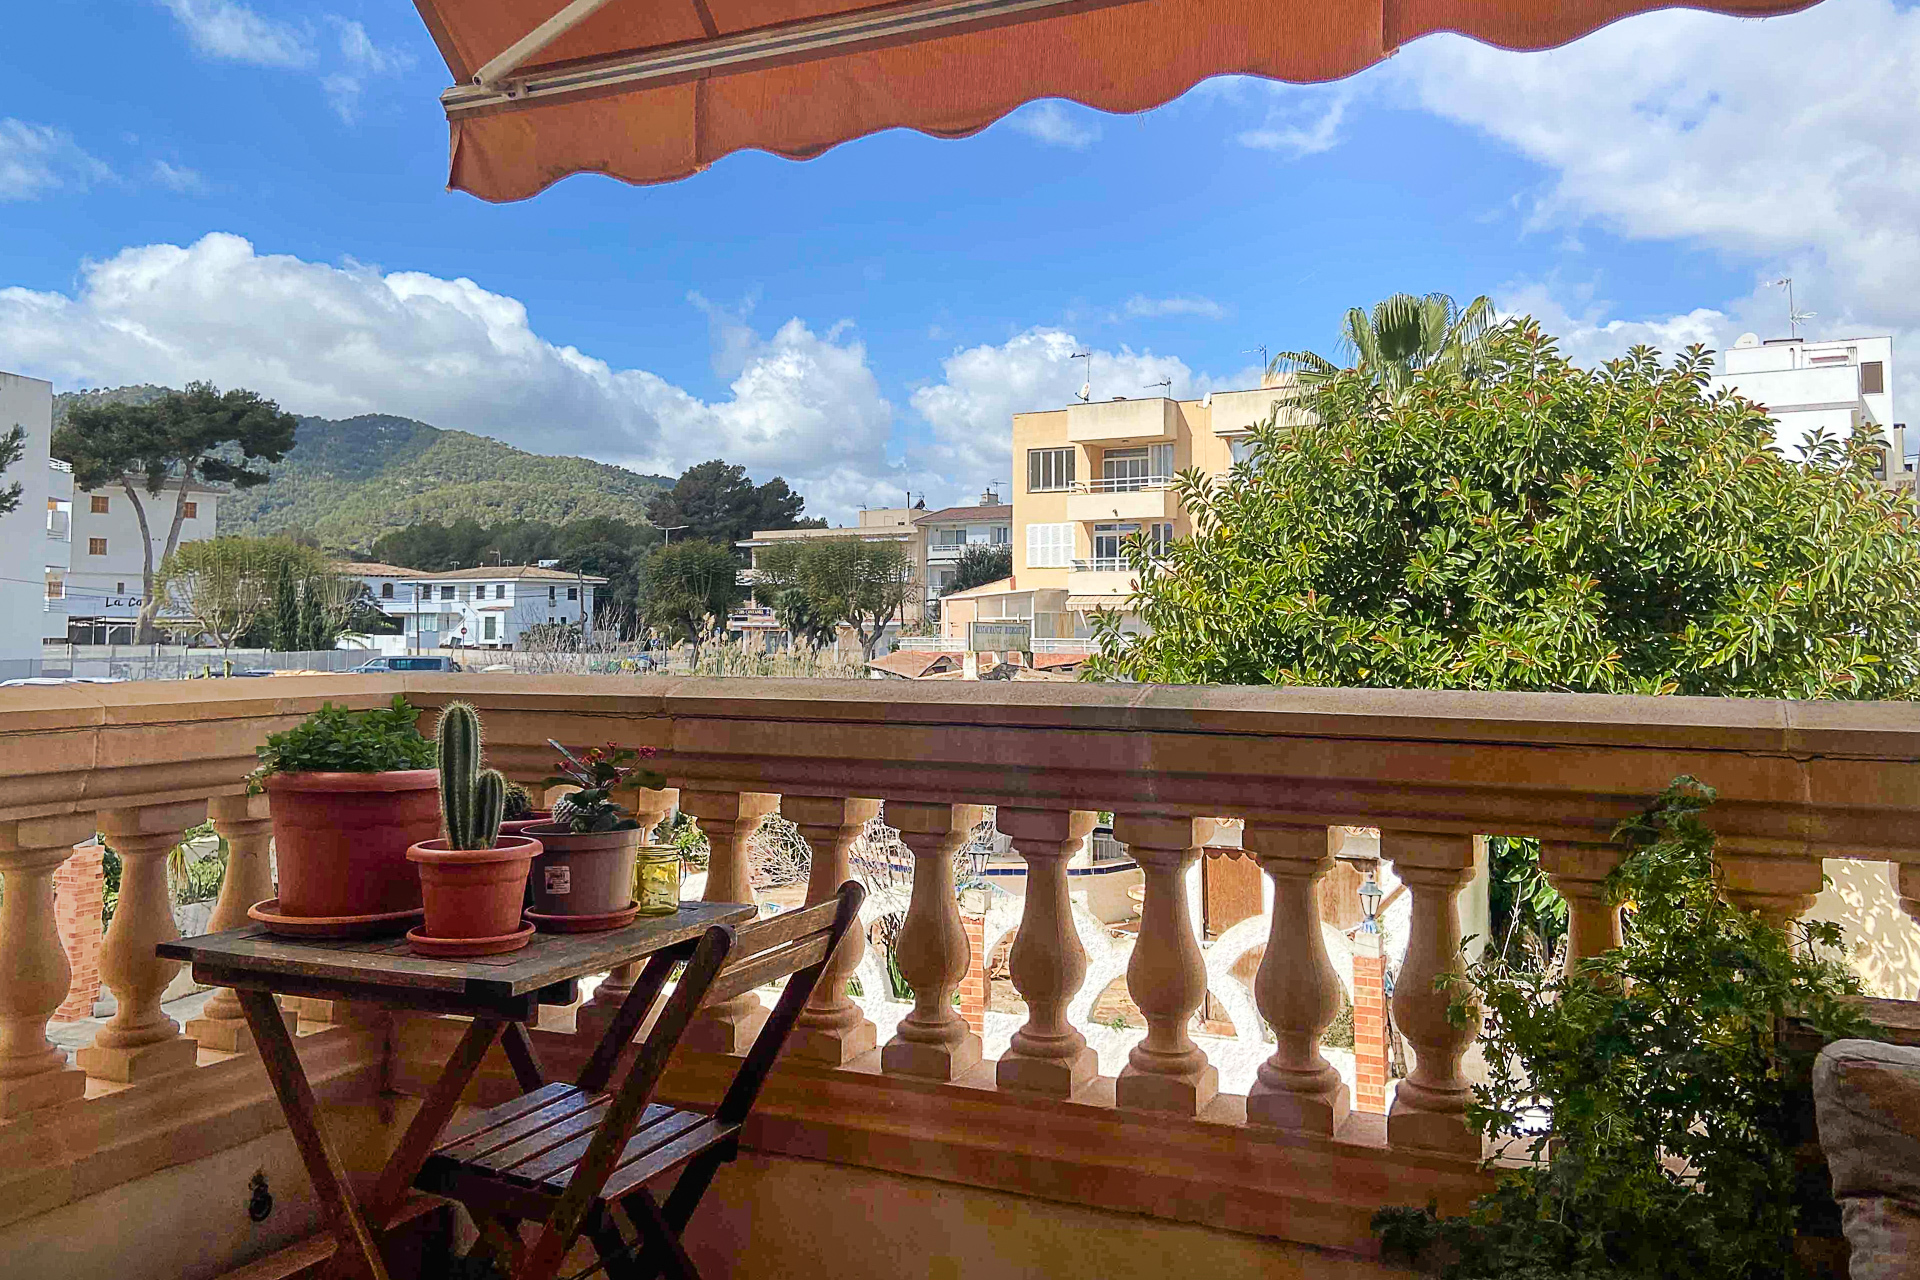 Ideal beach flat – in a still dreamy coastal village and only 100 metres from the ocean!, 07589 Canyamel (Spain), Apartment